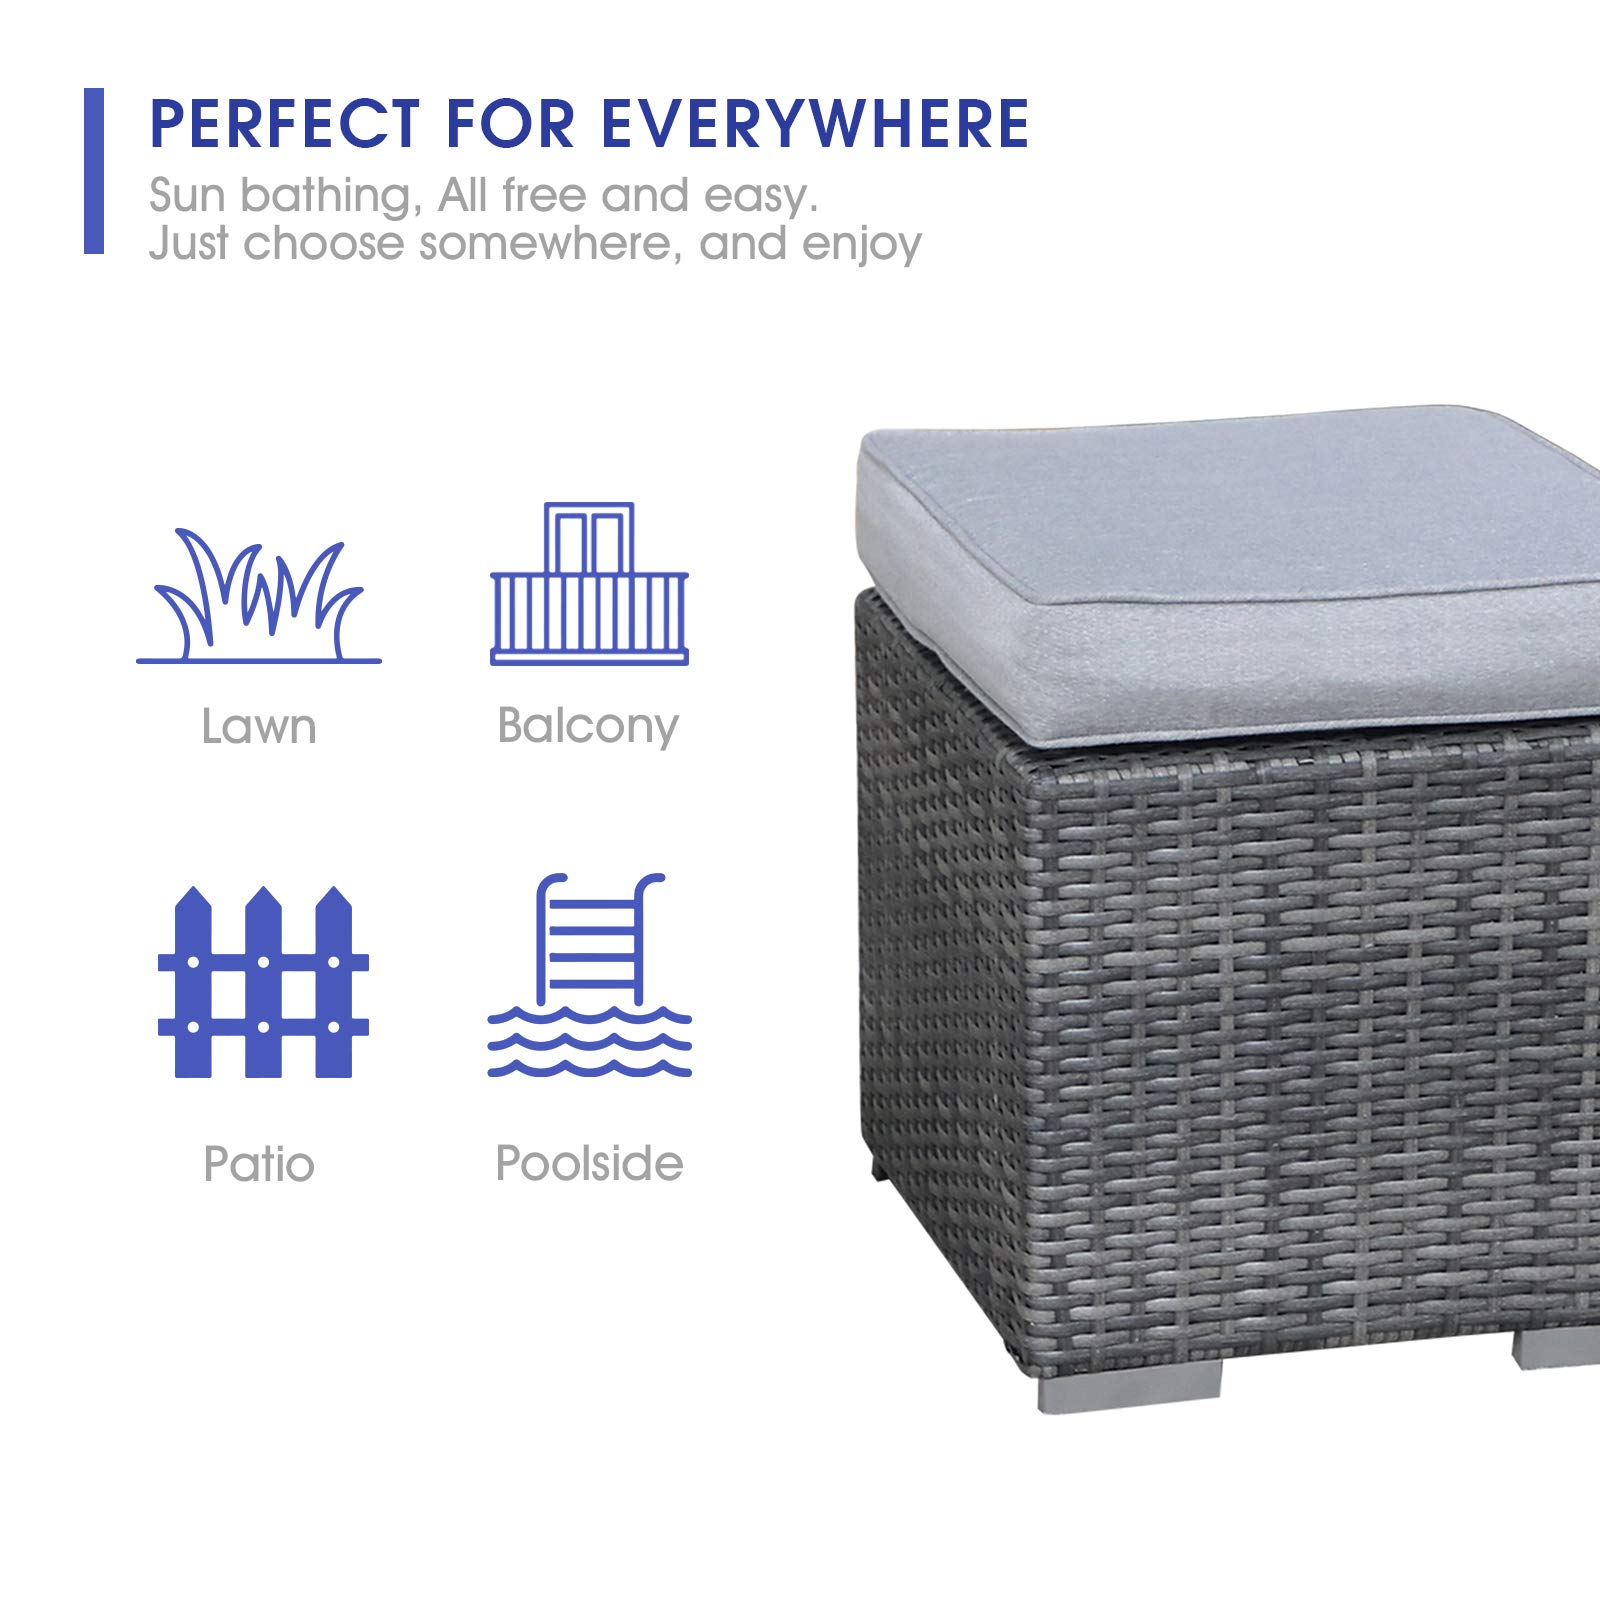 Patiorama 2 Pieces Assembled Outdoor Patio Ottoman, Indoor Outdoor All-Weather Grey Wicker Rattan Outdoor Footstool Footrest Seat with Light Grey Cushions, No Assembly Required